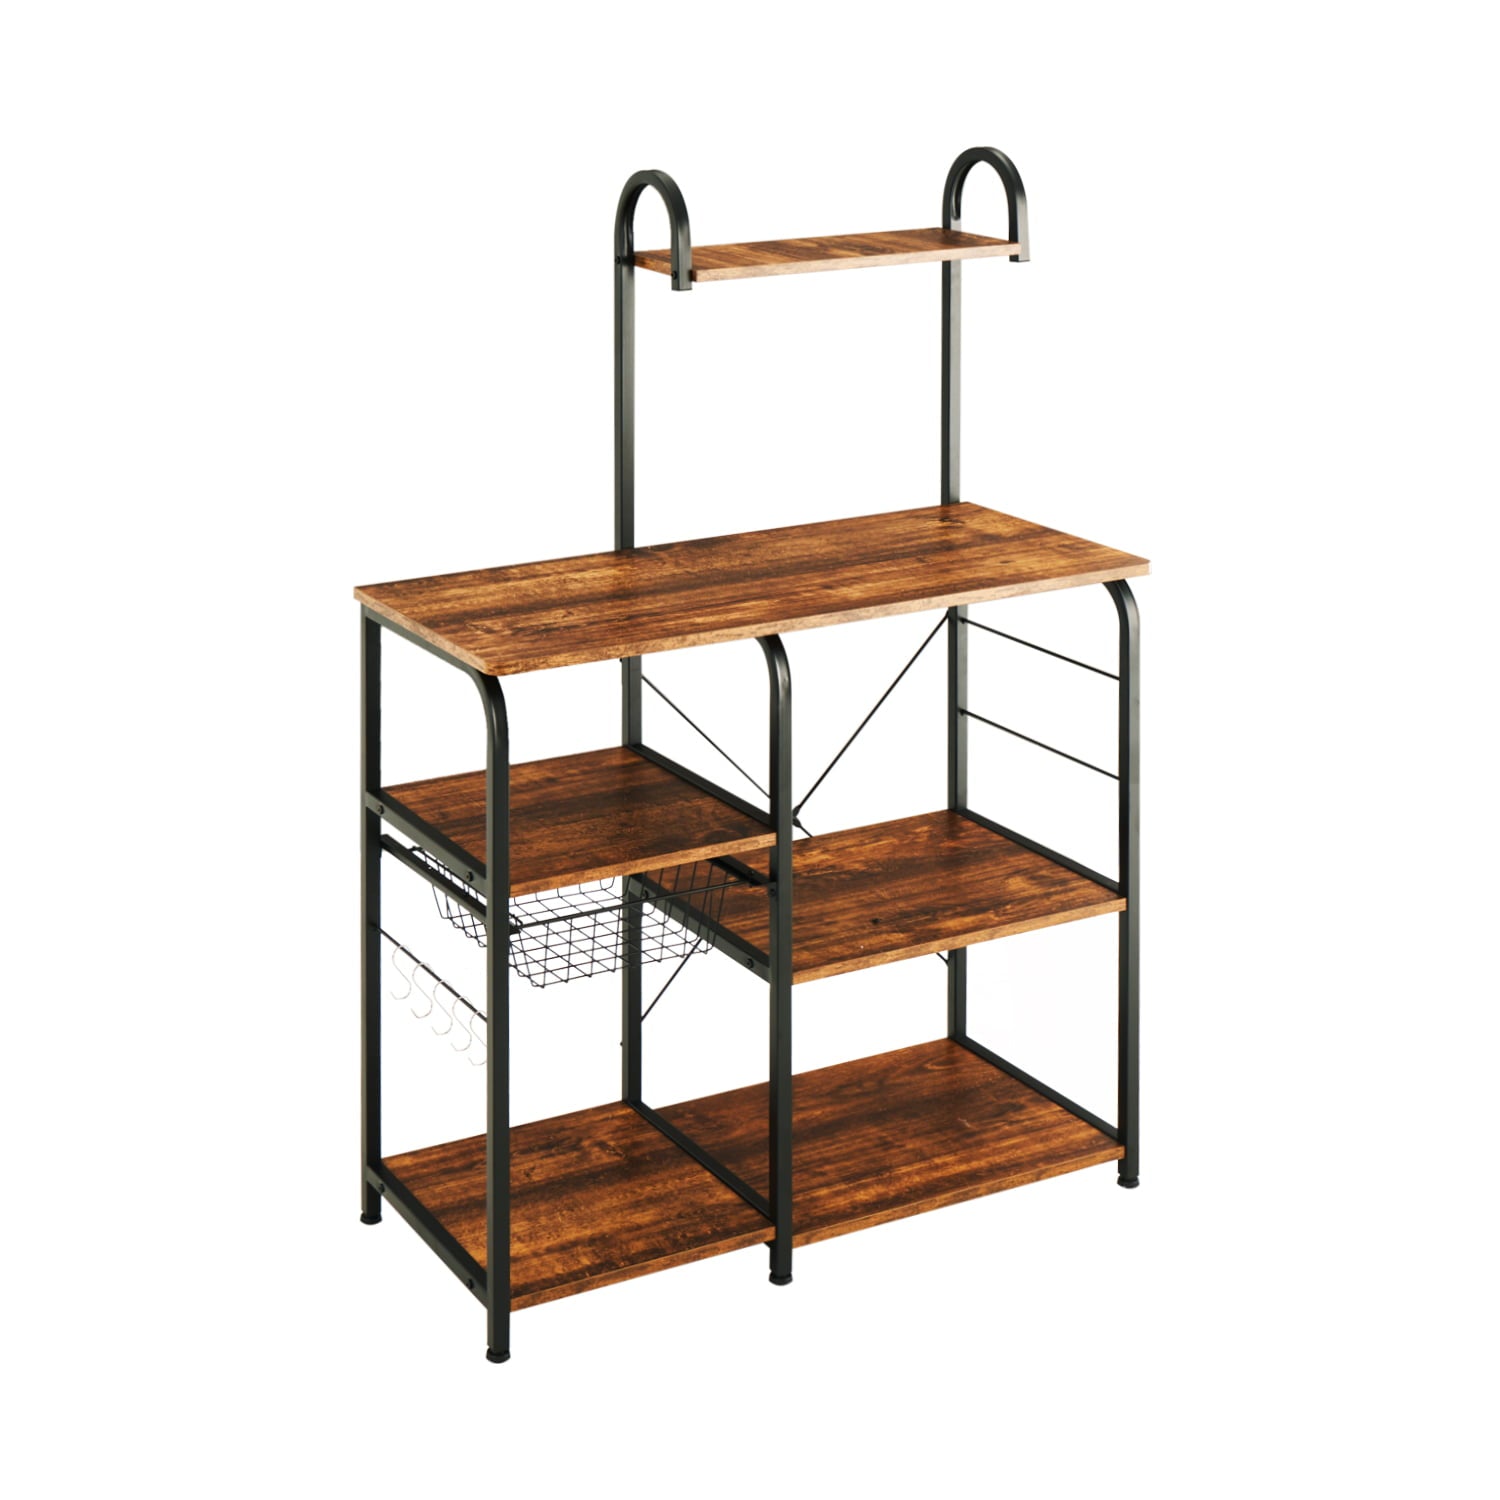 Kitchen Utility Storage Shelf Microwave Stand Cart on Wheels with Side Hooks by LAZYLAND（Brown）